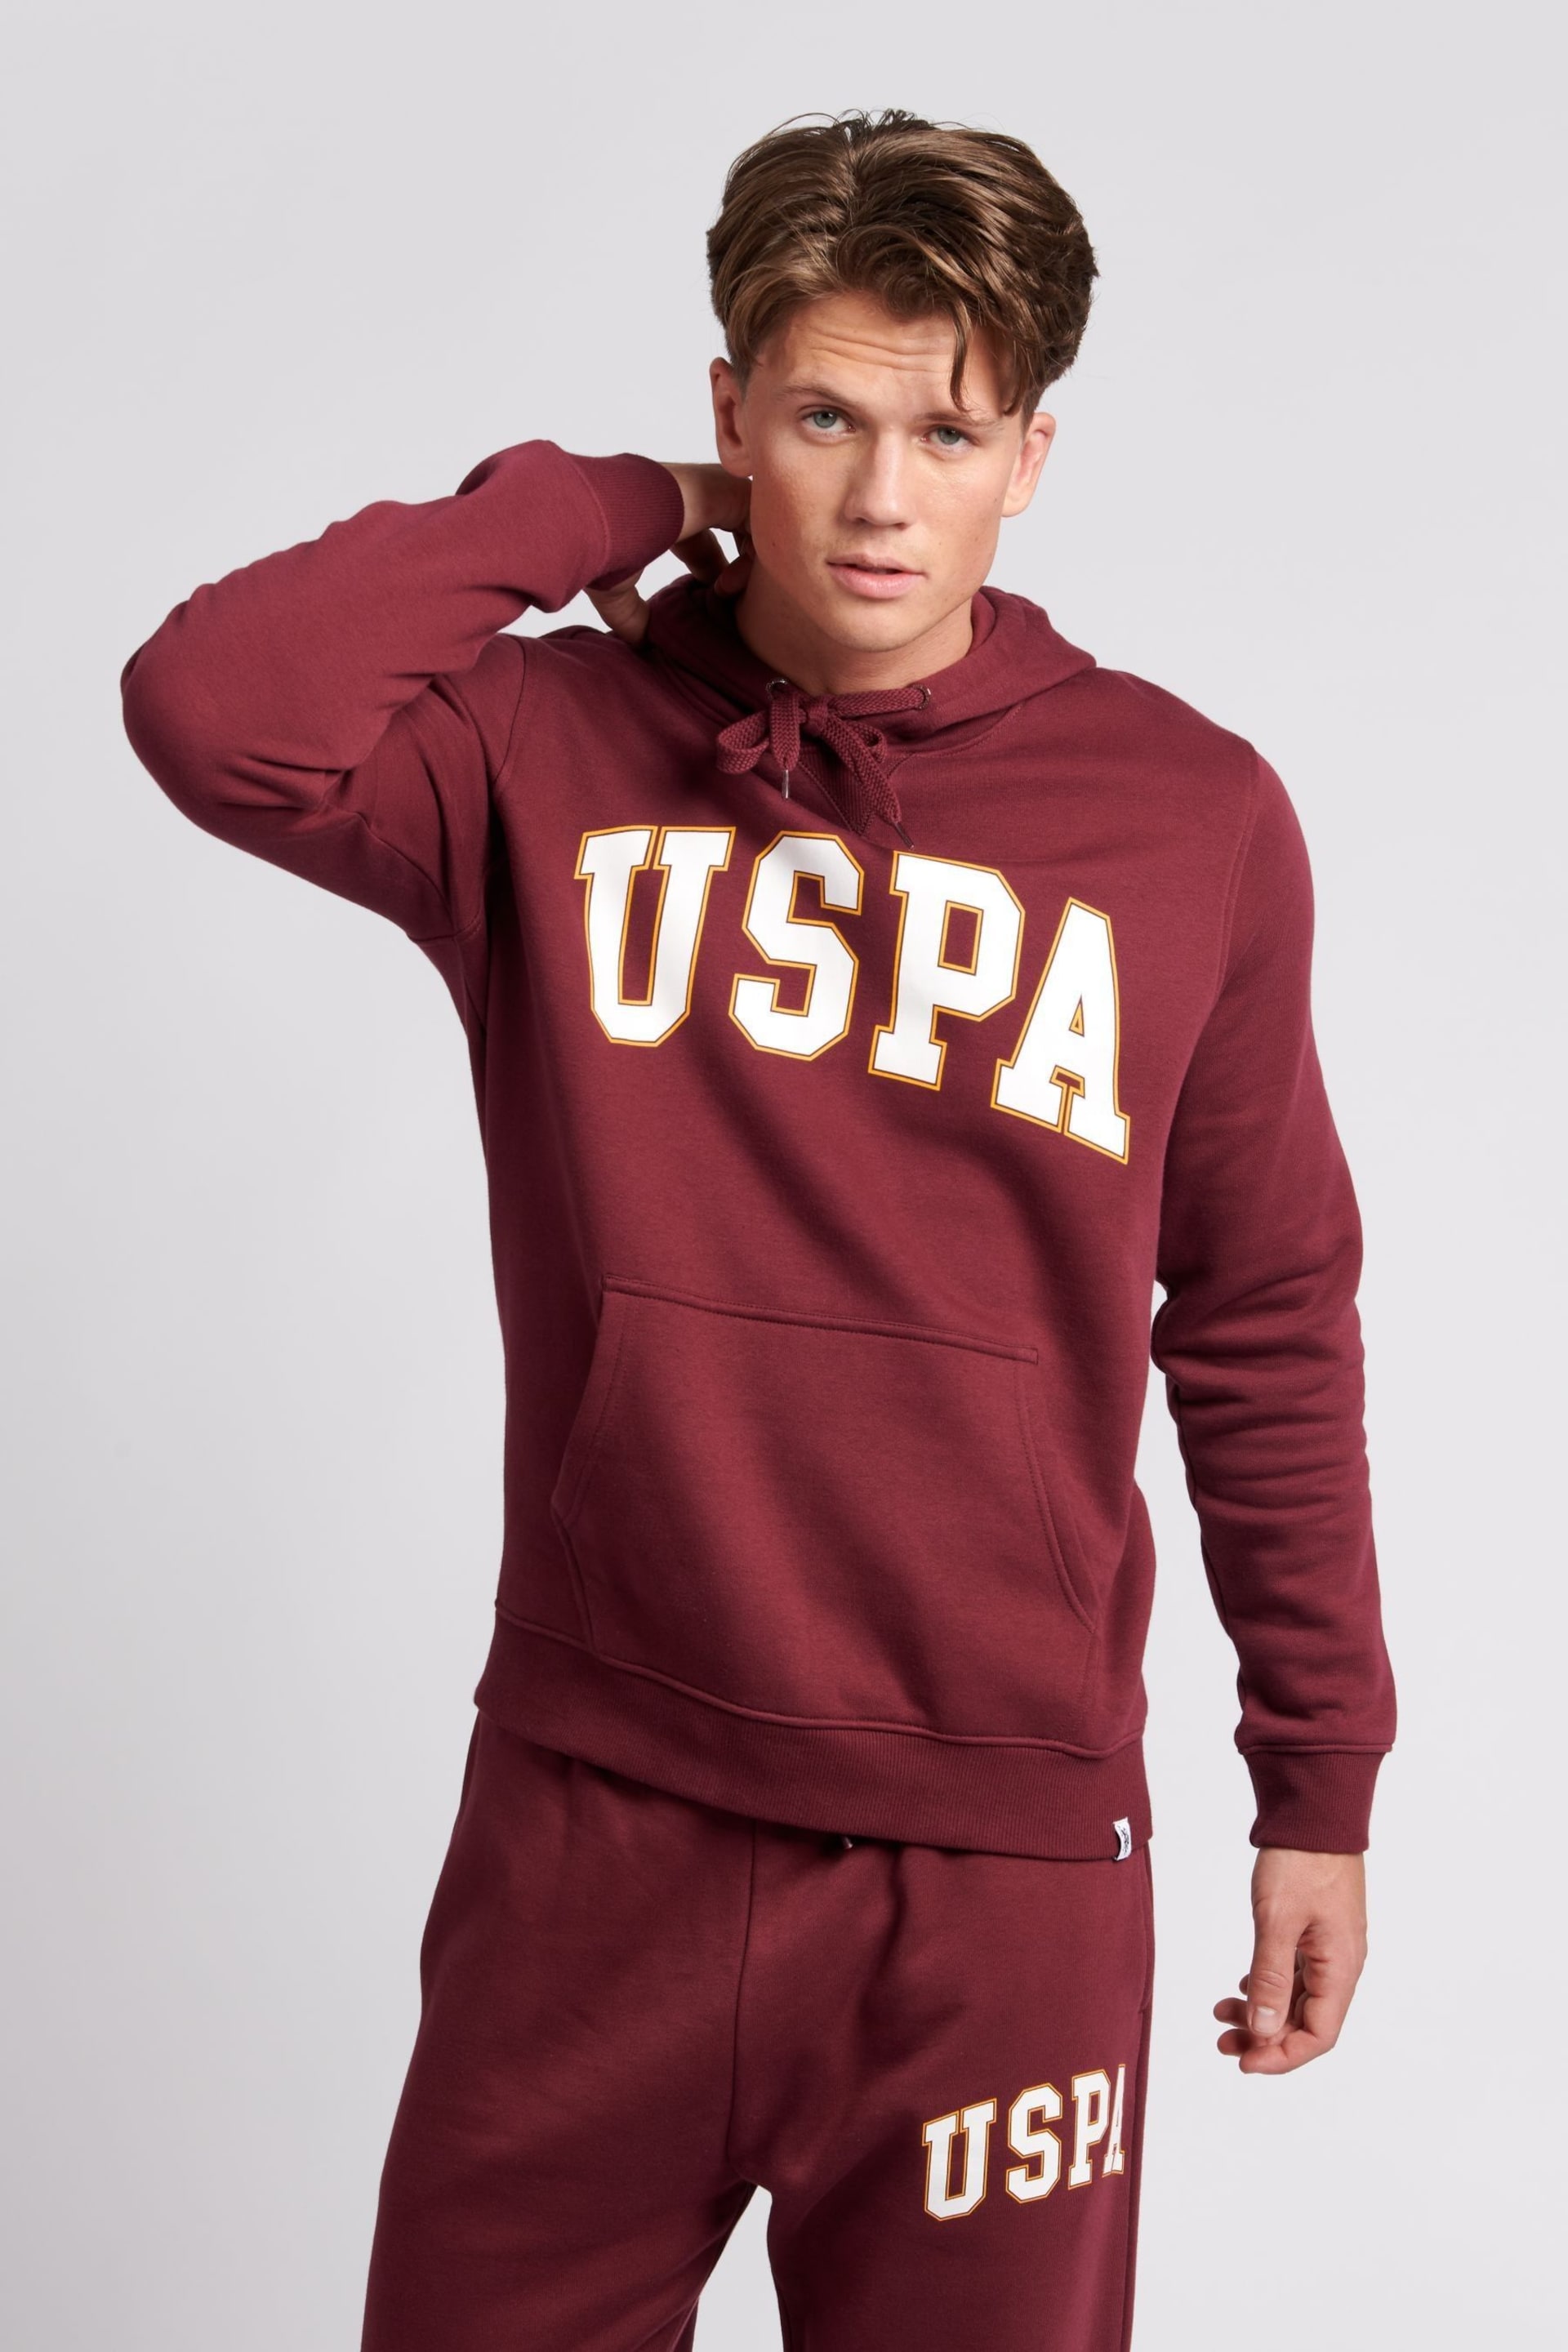 U.S. Polo Assn. Mens Arch Graphic OH Hoodie - Image 1 of 6